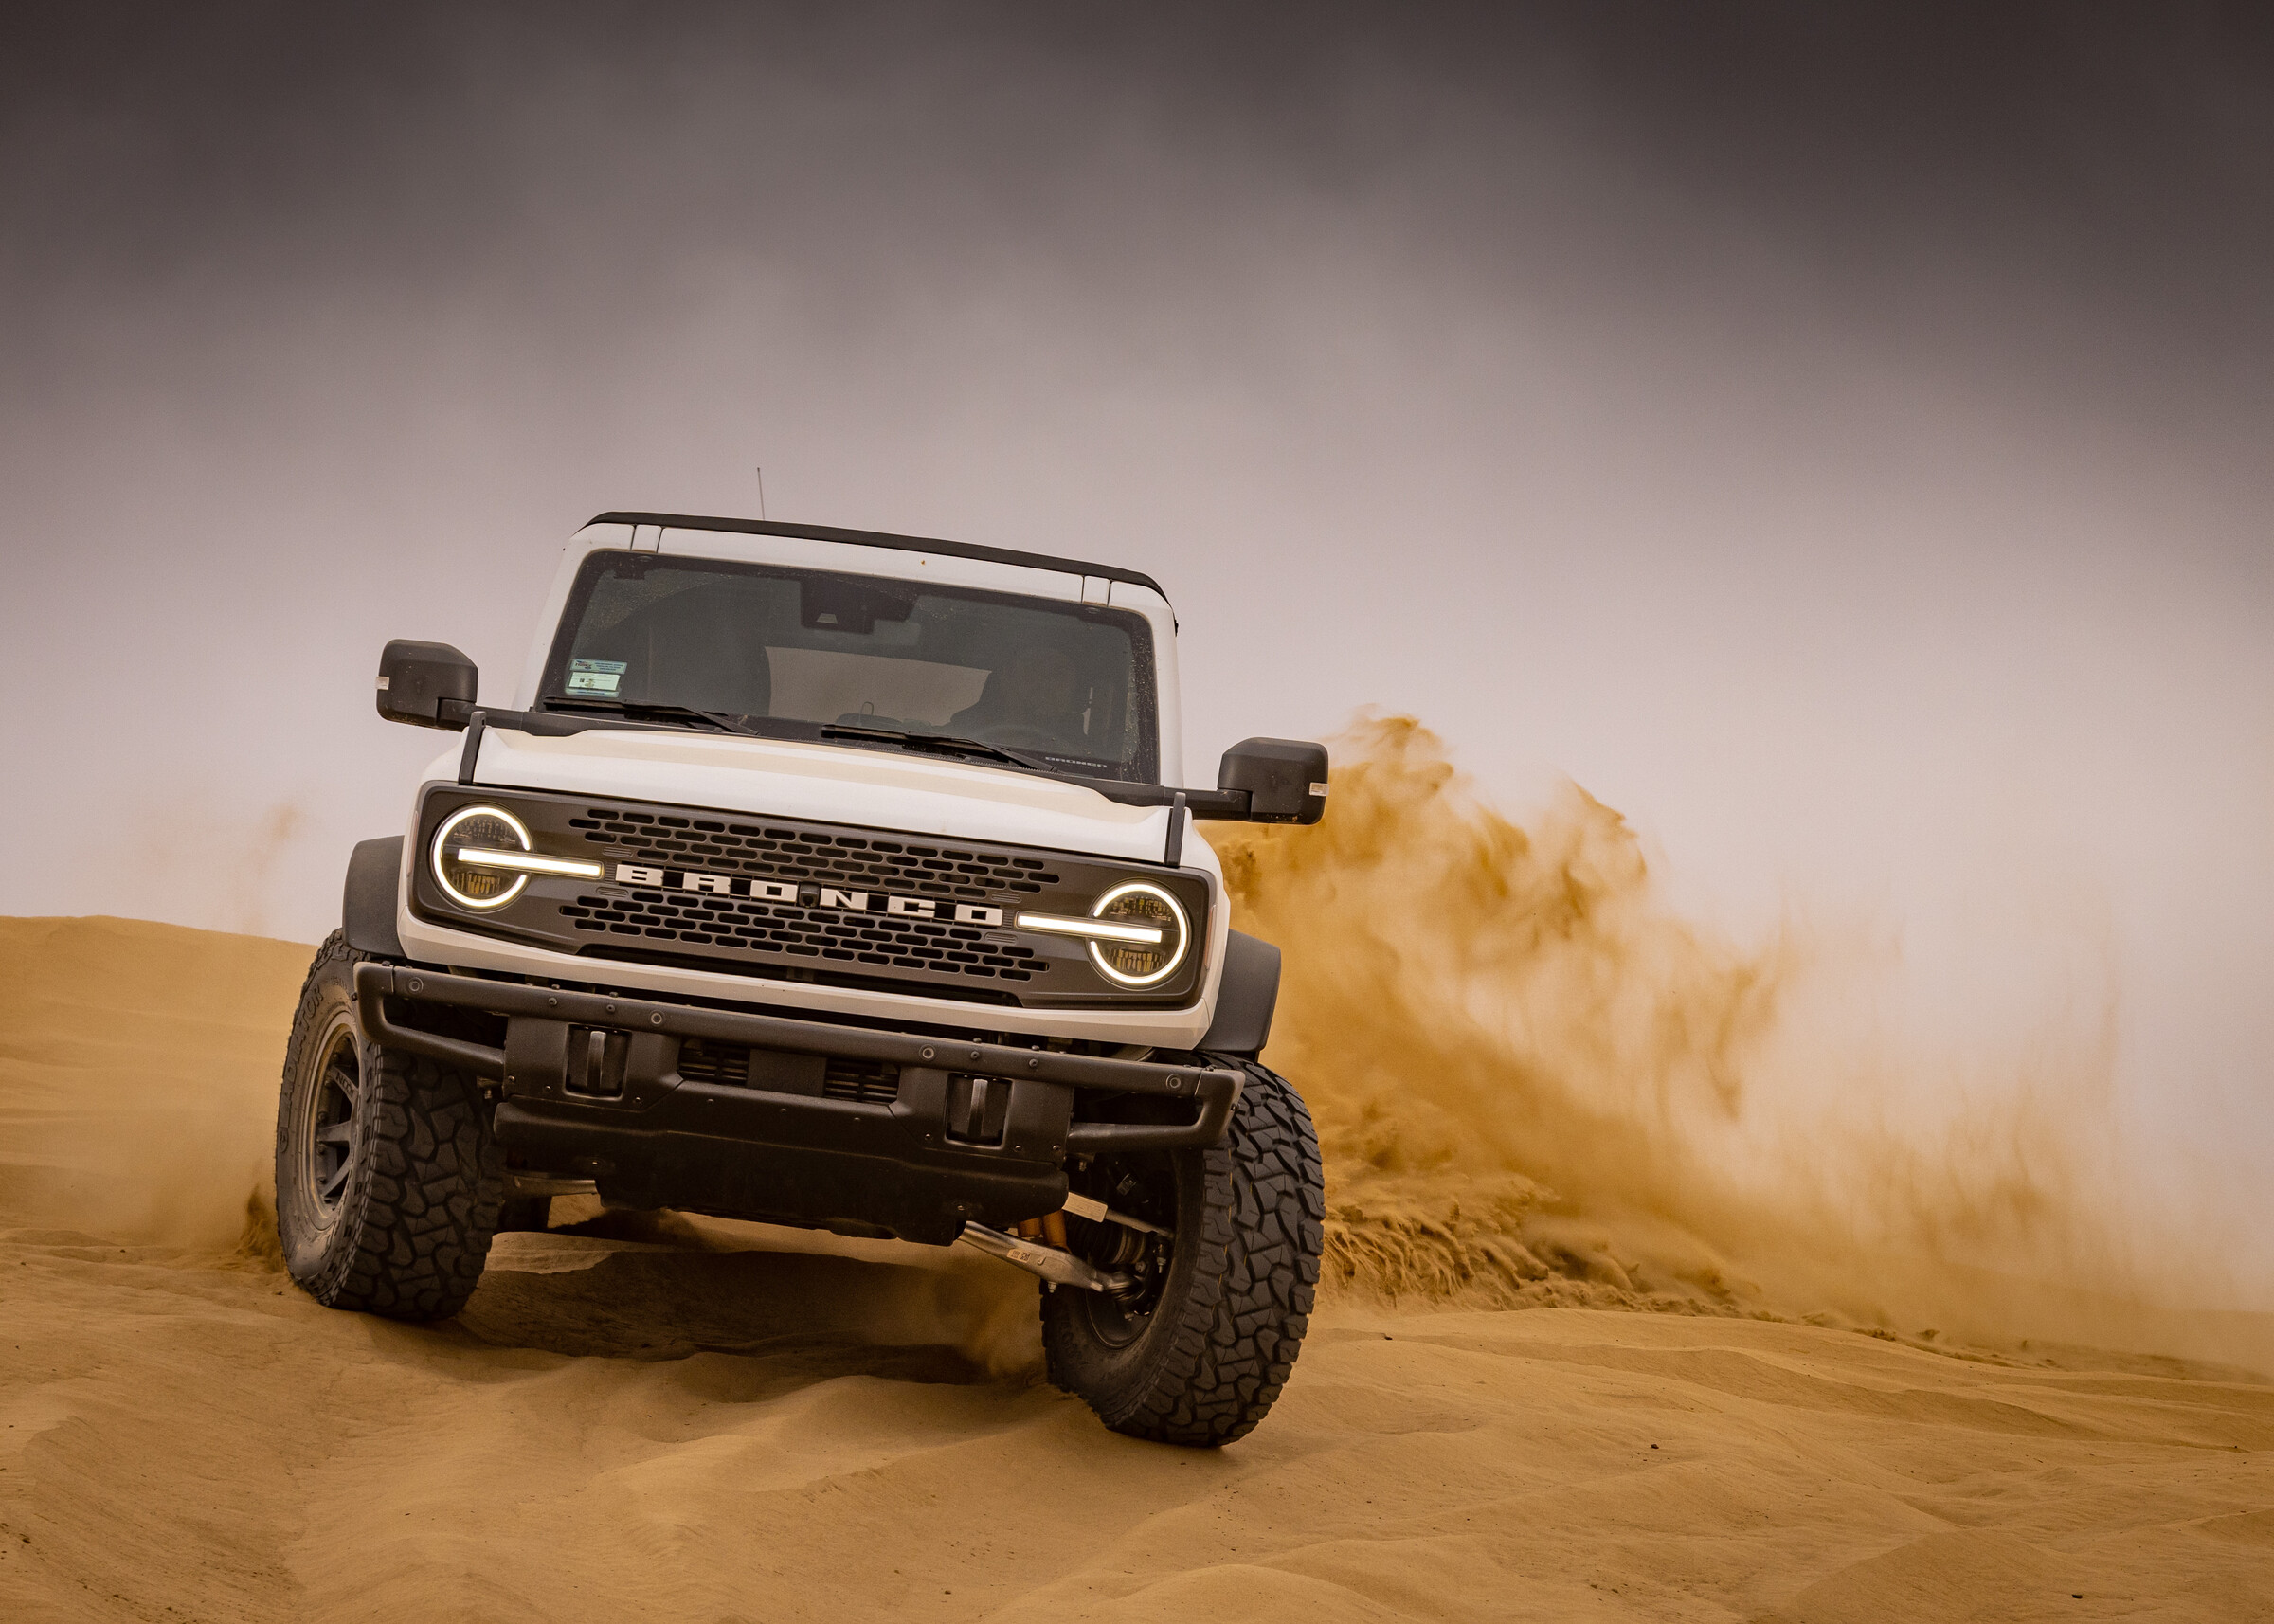 Ford Bronco King of the Hammers to Baja in a Badlands ULI98fu